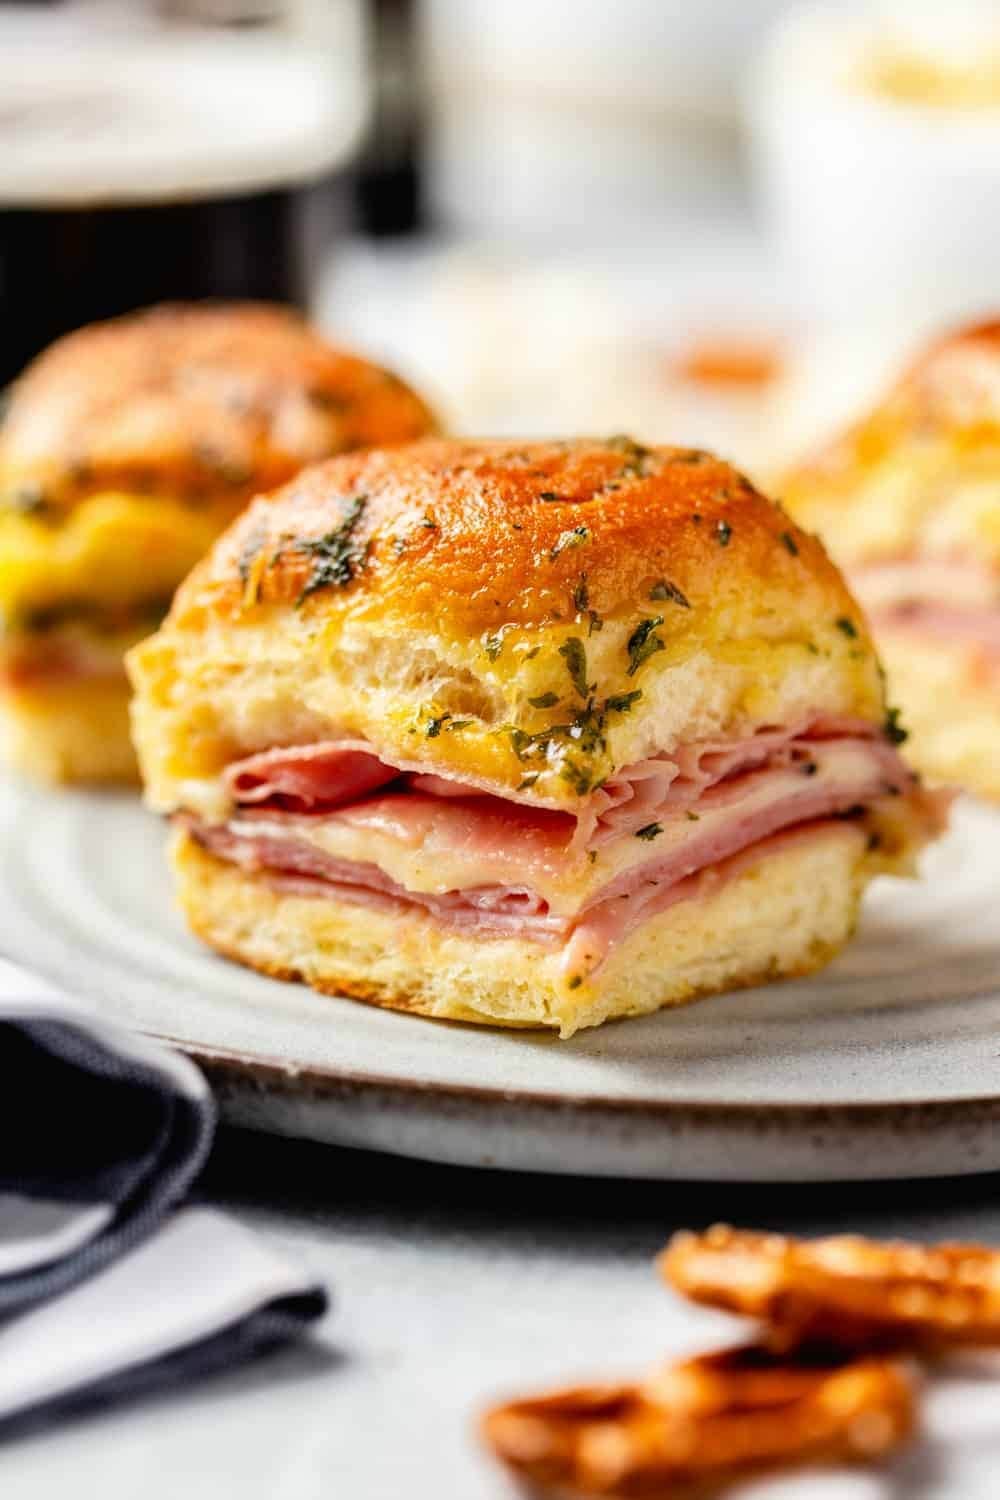 Sliders with ham and cheese filling on plate.